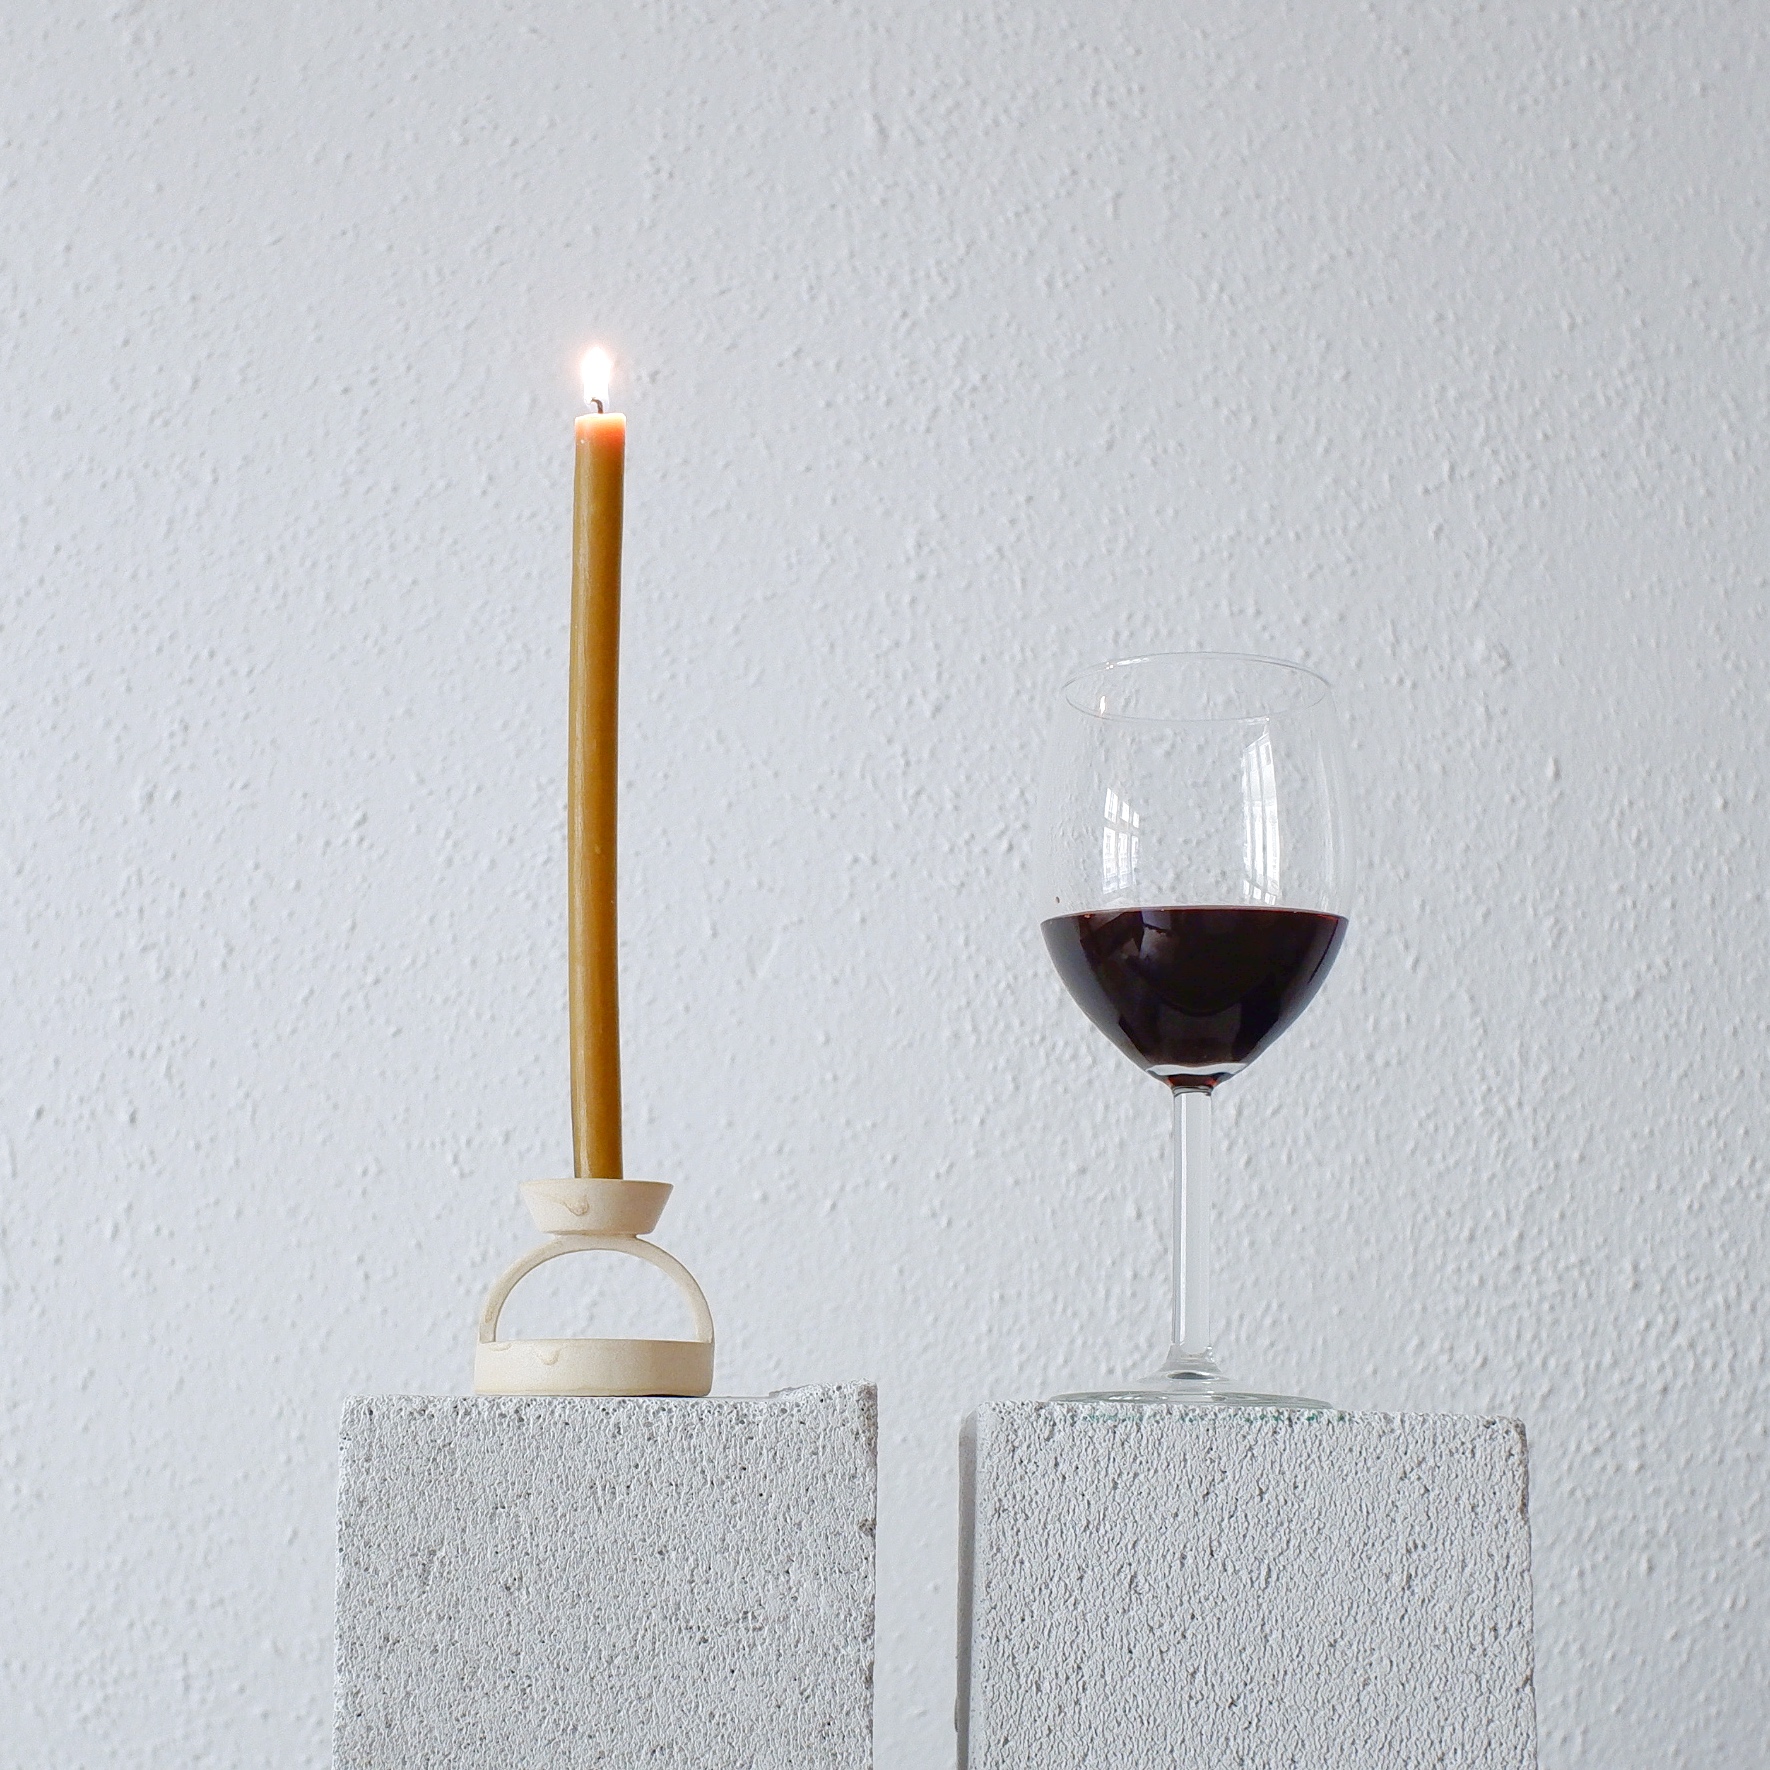 Cup of Wine and a Ceramic Porcelain Candle Holder with a Lit Candle